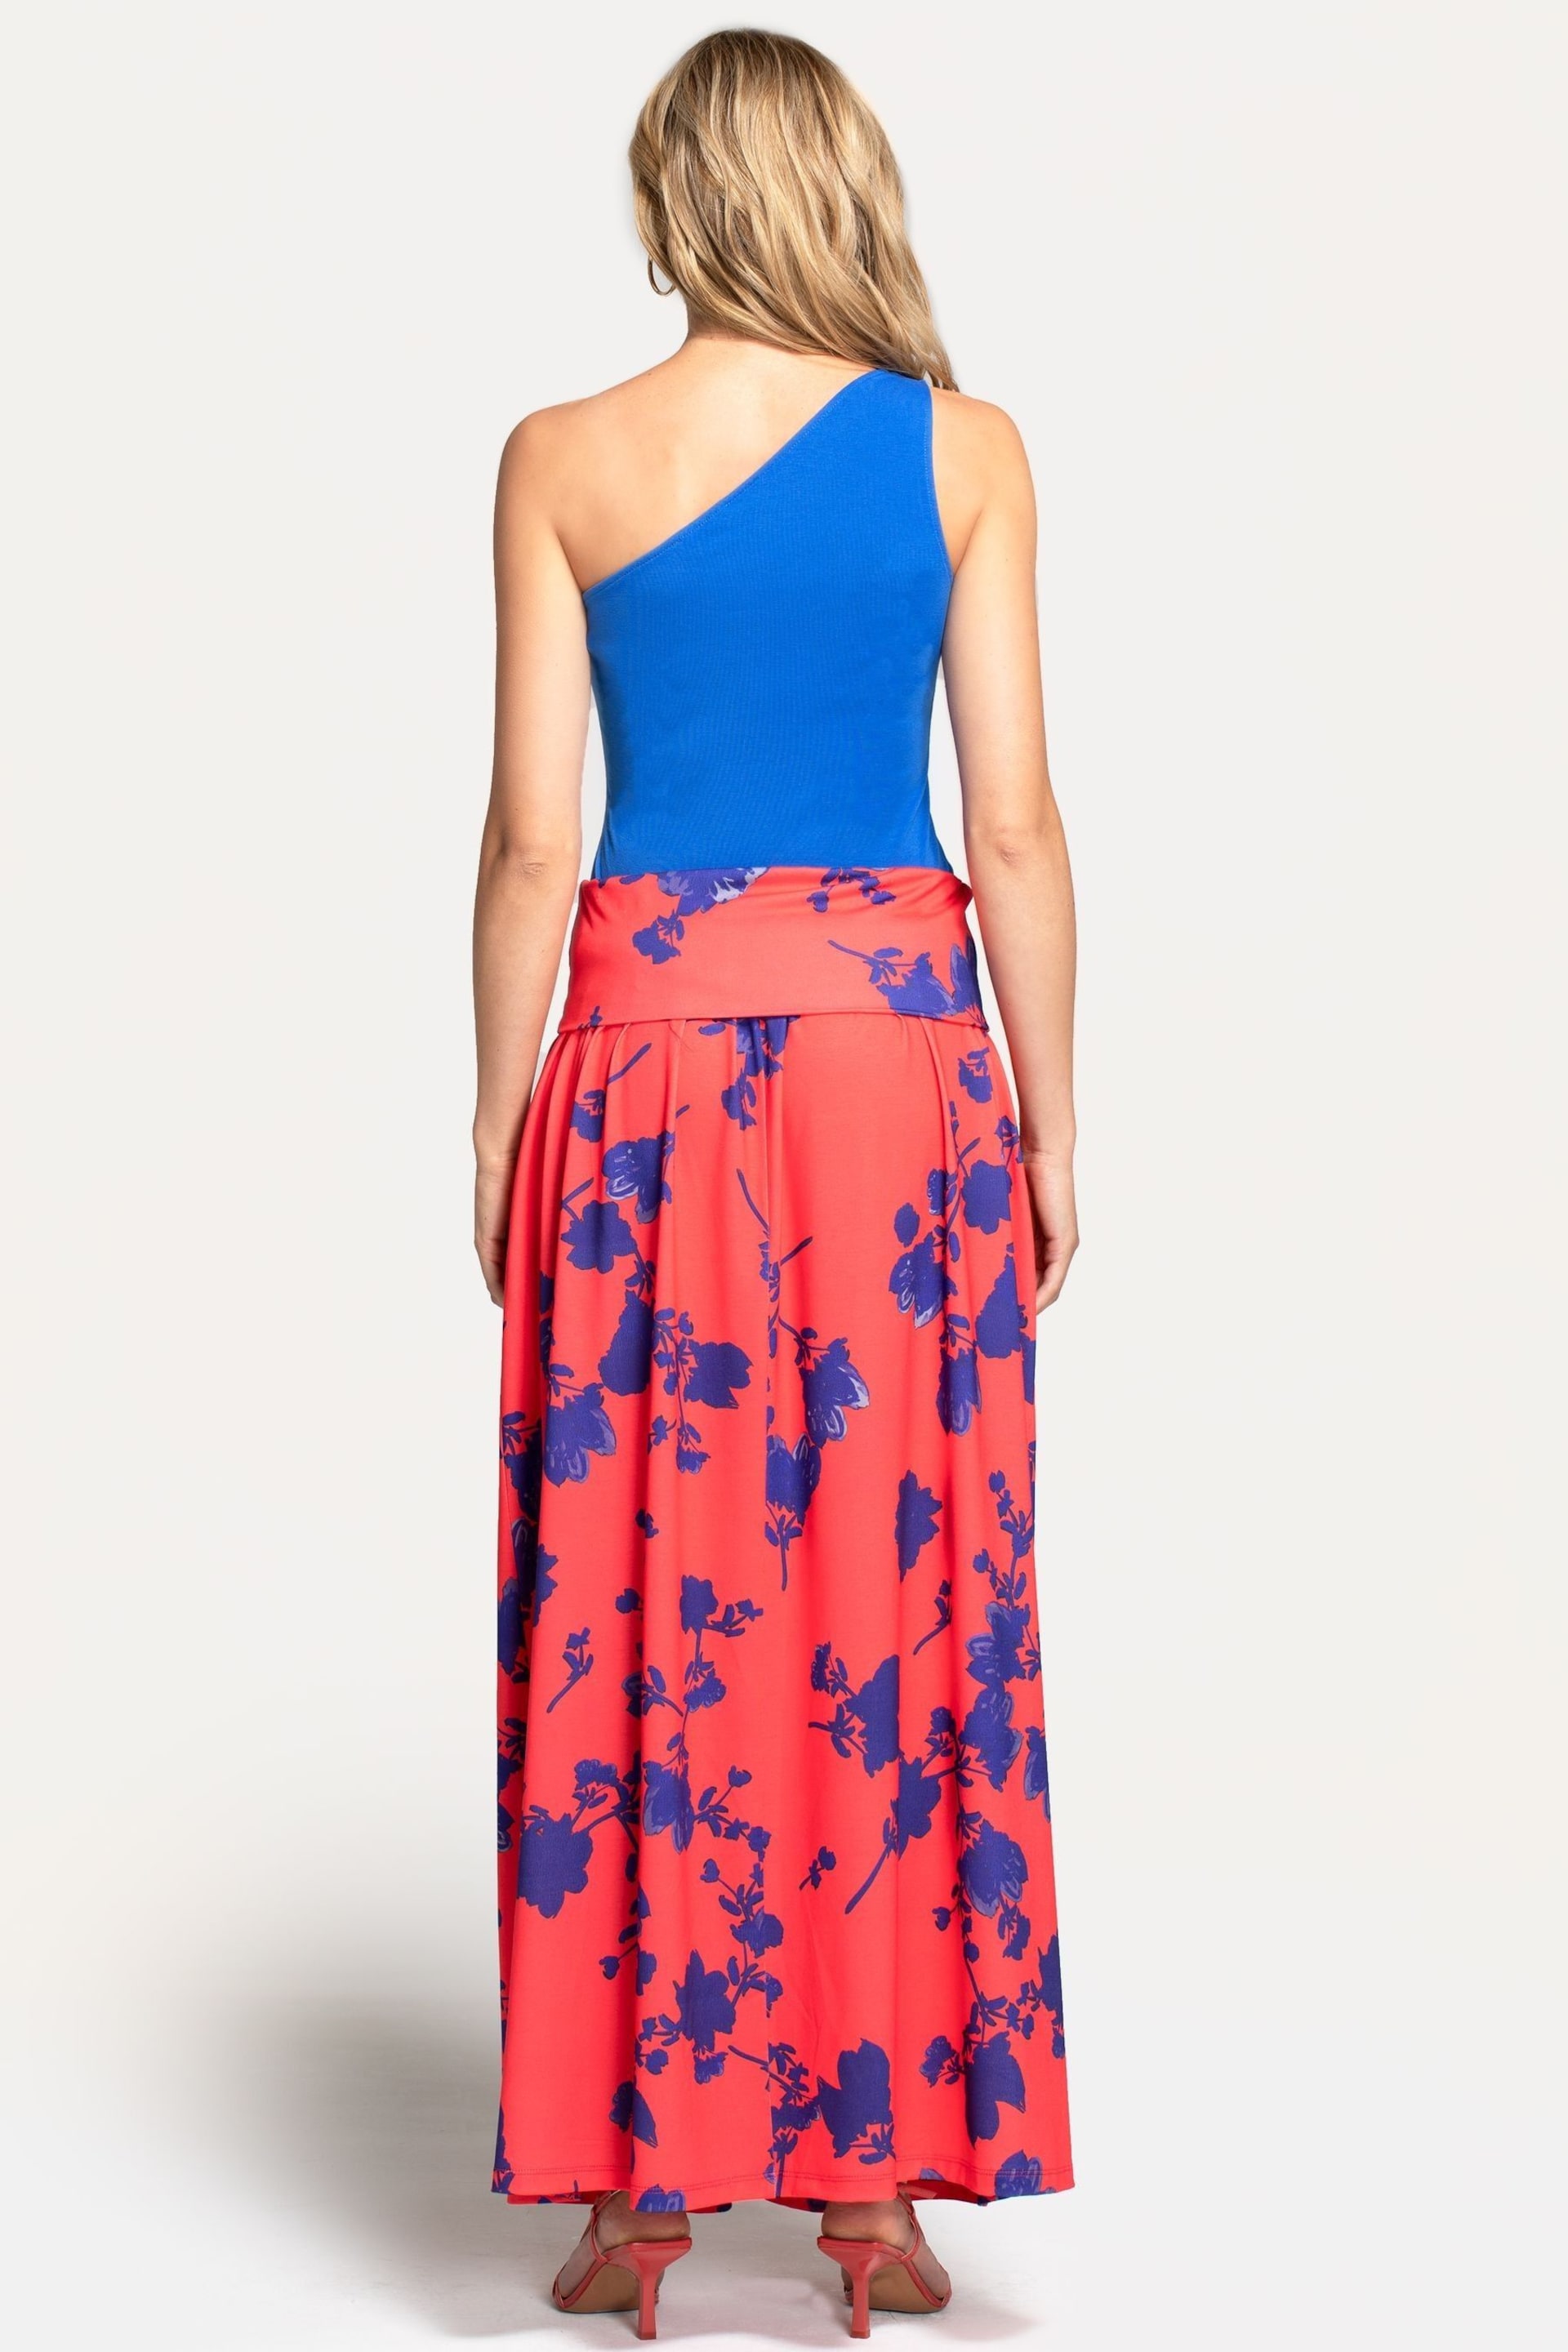 Hot Squash Red Roll Top Maxi Skirts - Image 2 of 3